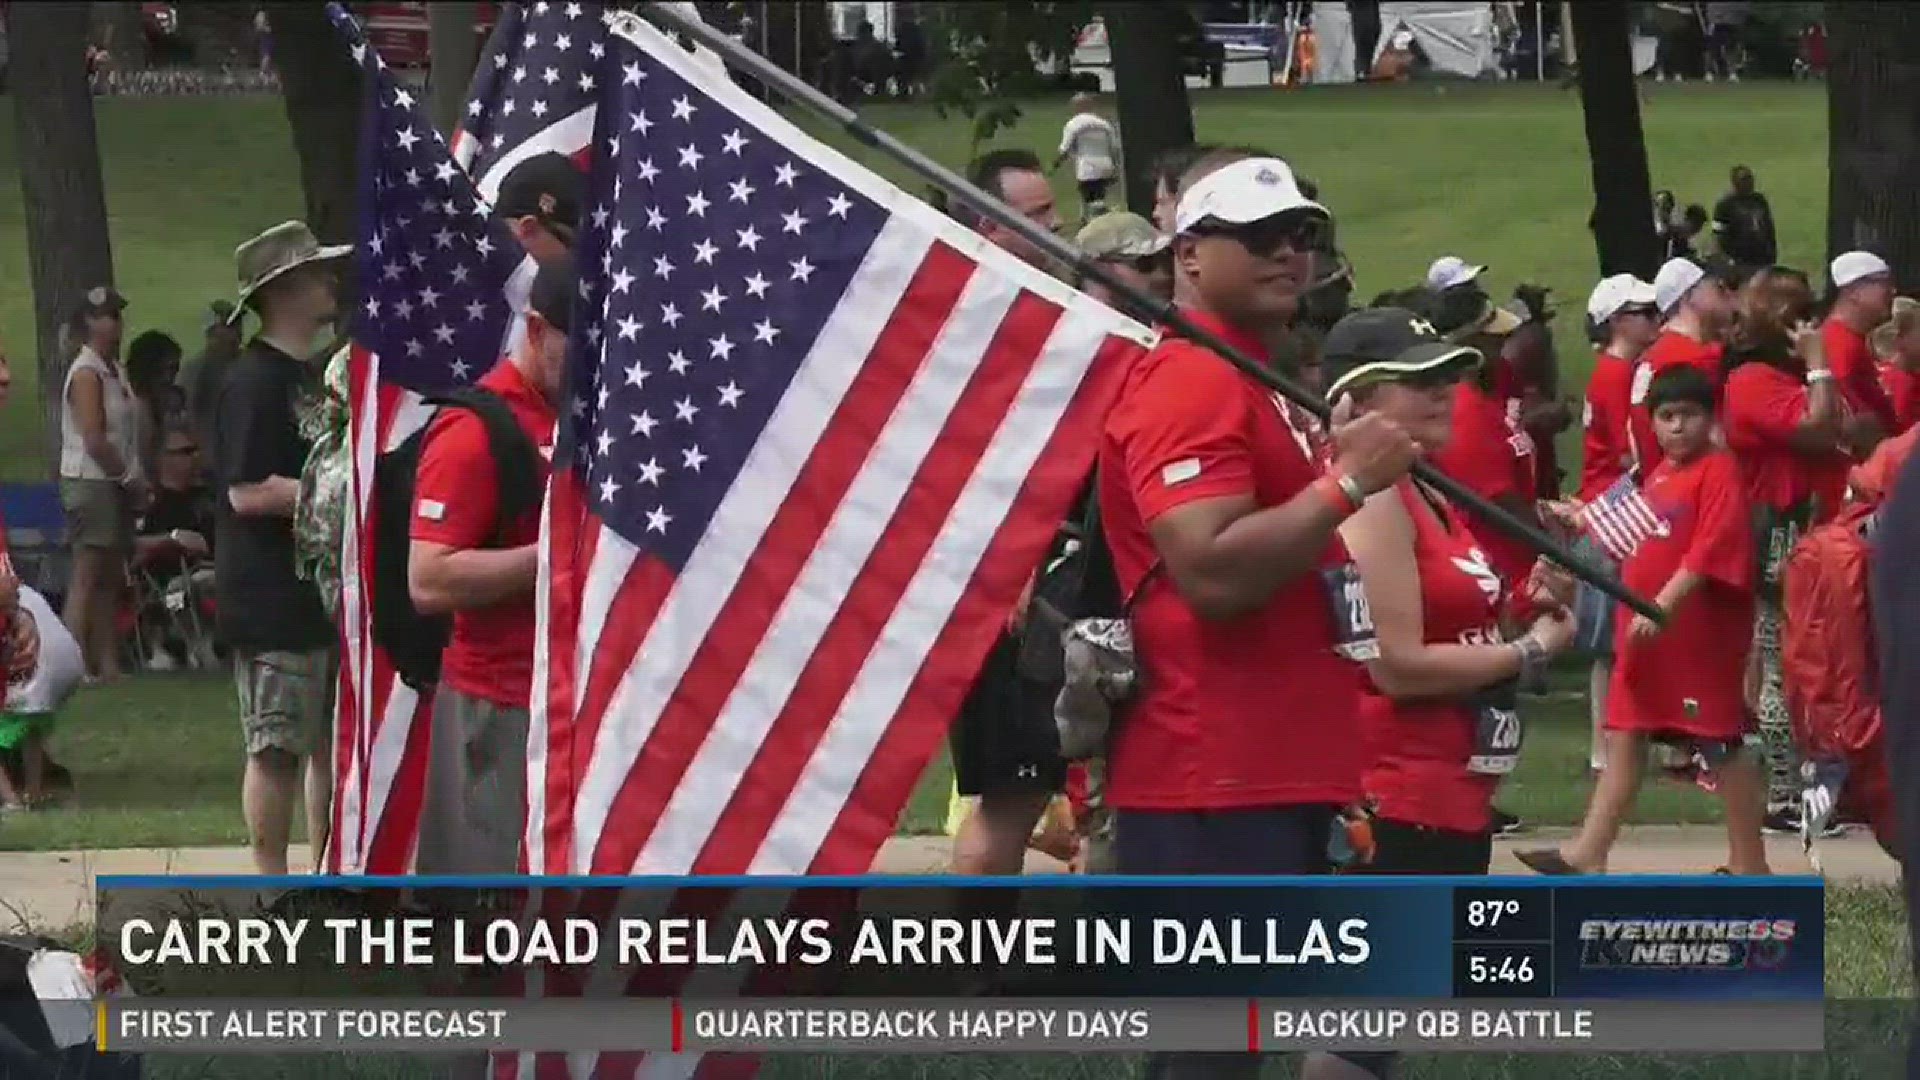 Carry the Load relays arrive in Dallas